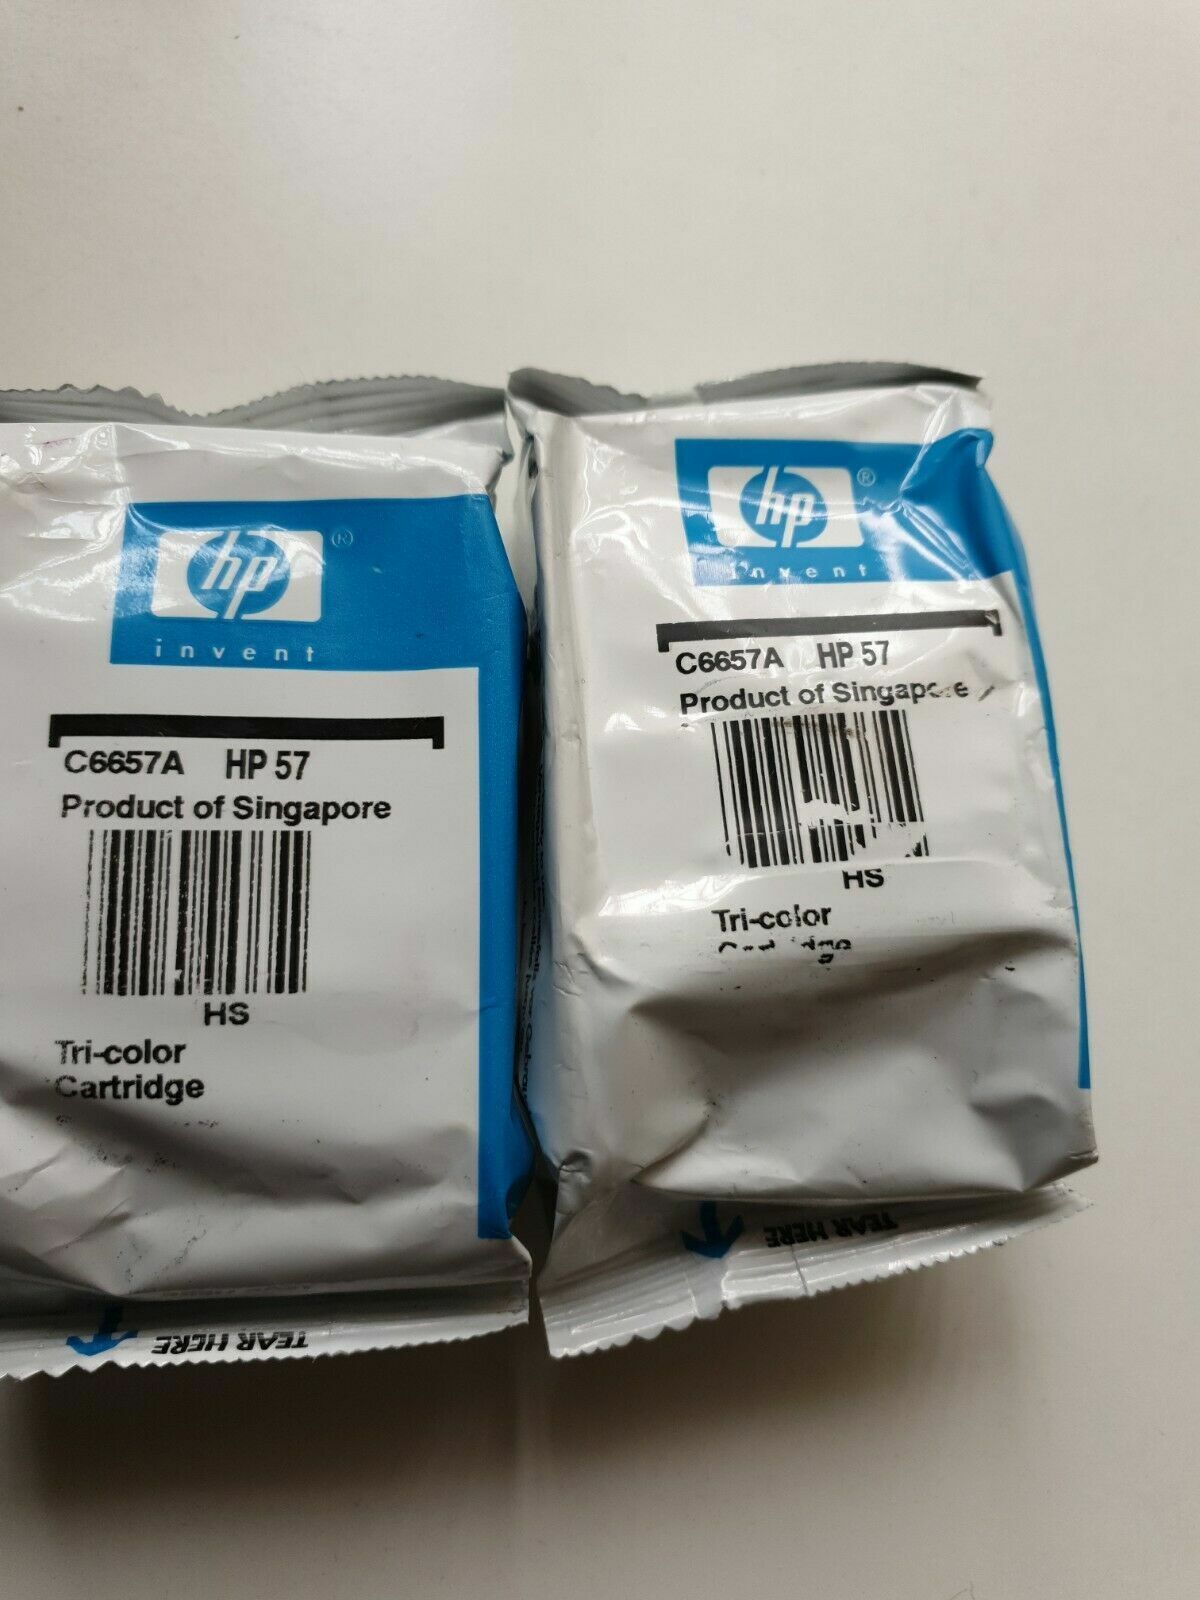 2x Genuine HP 57 Tri-Colour ink cartridges (C6657A) - FREE UK DELIVERY!